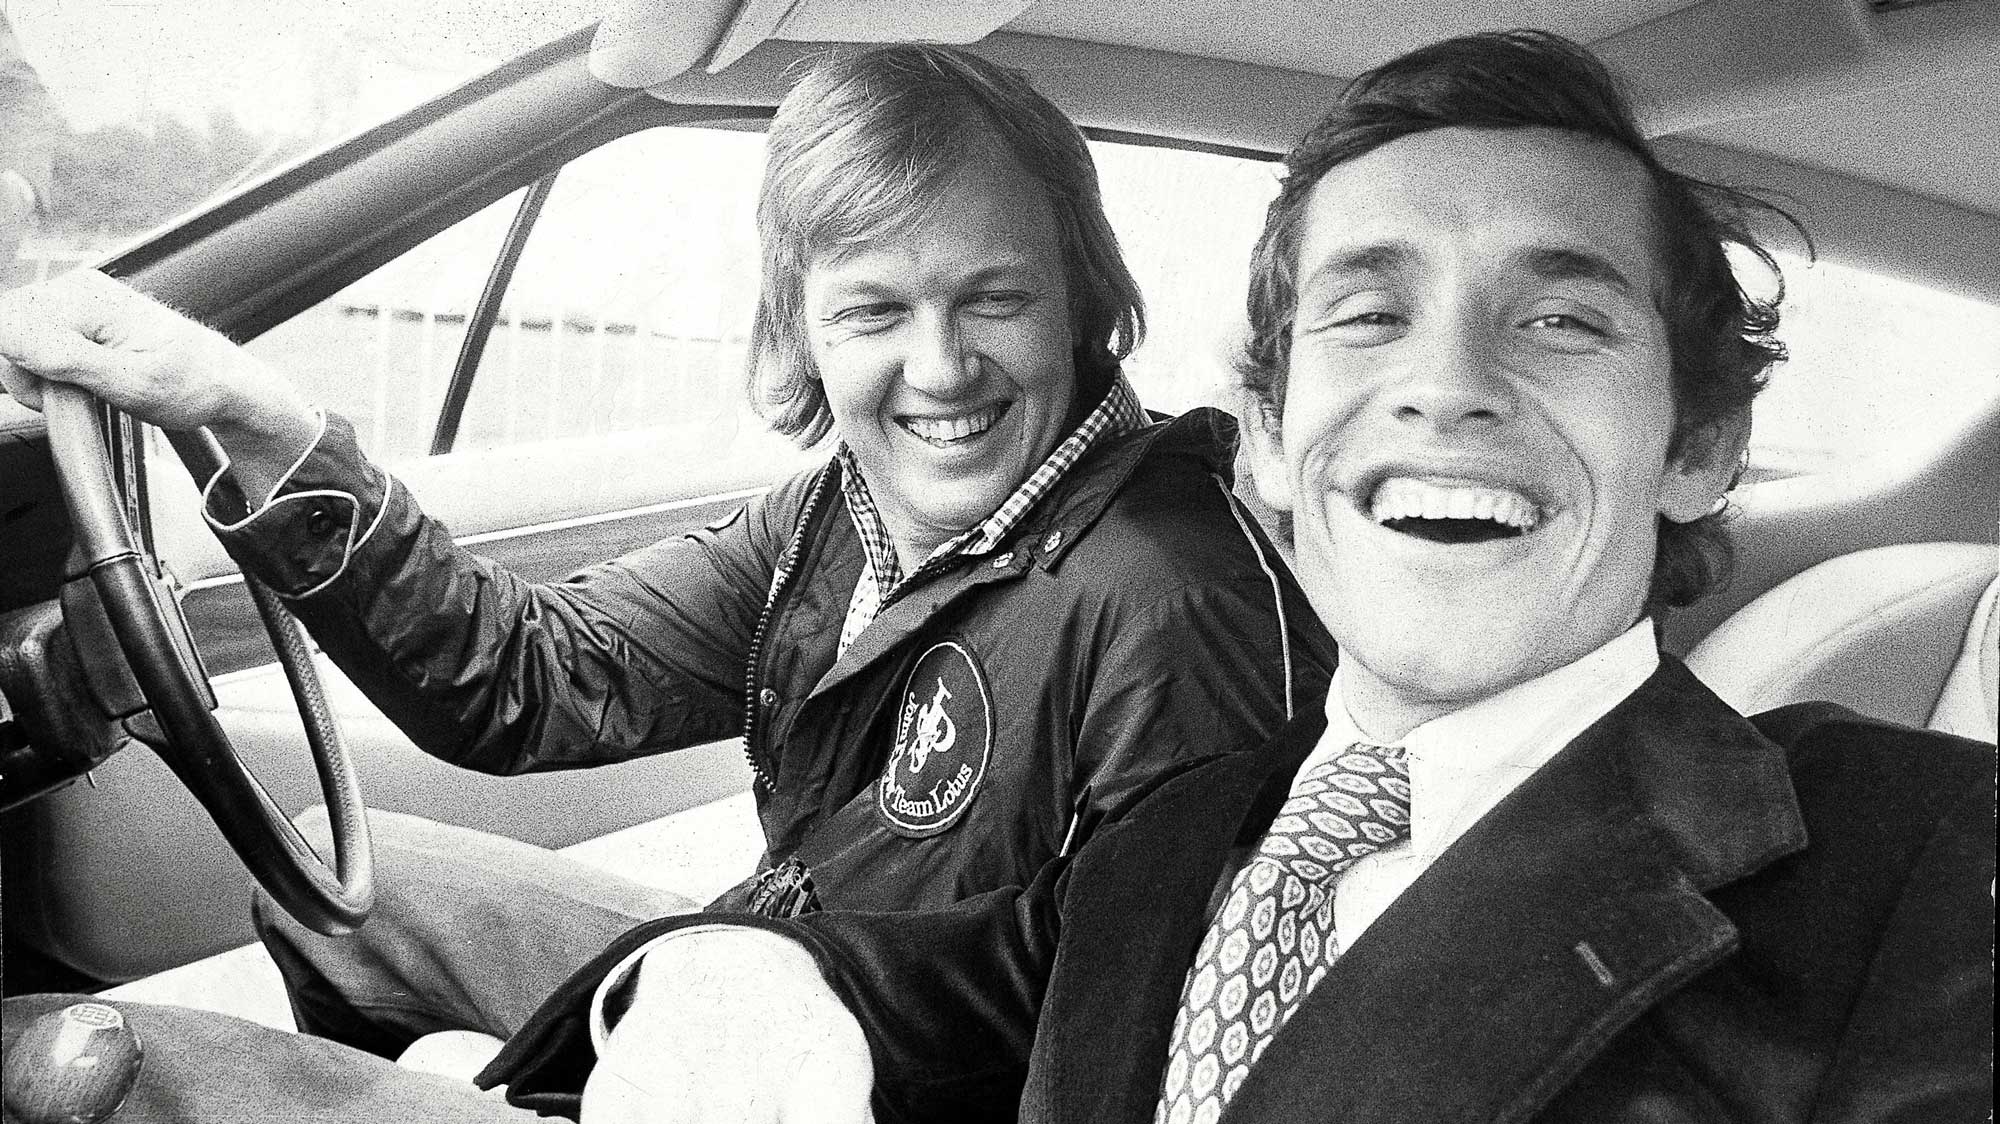 Ronnie Peterson and Jacky Ickx laugh together